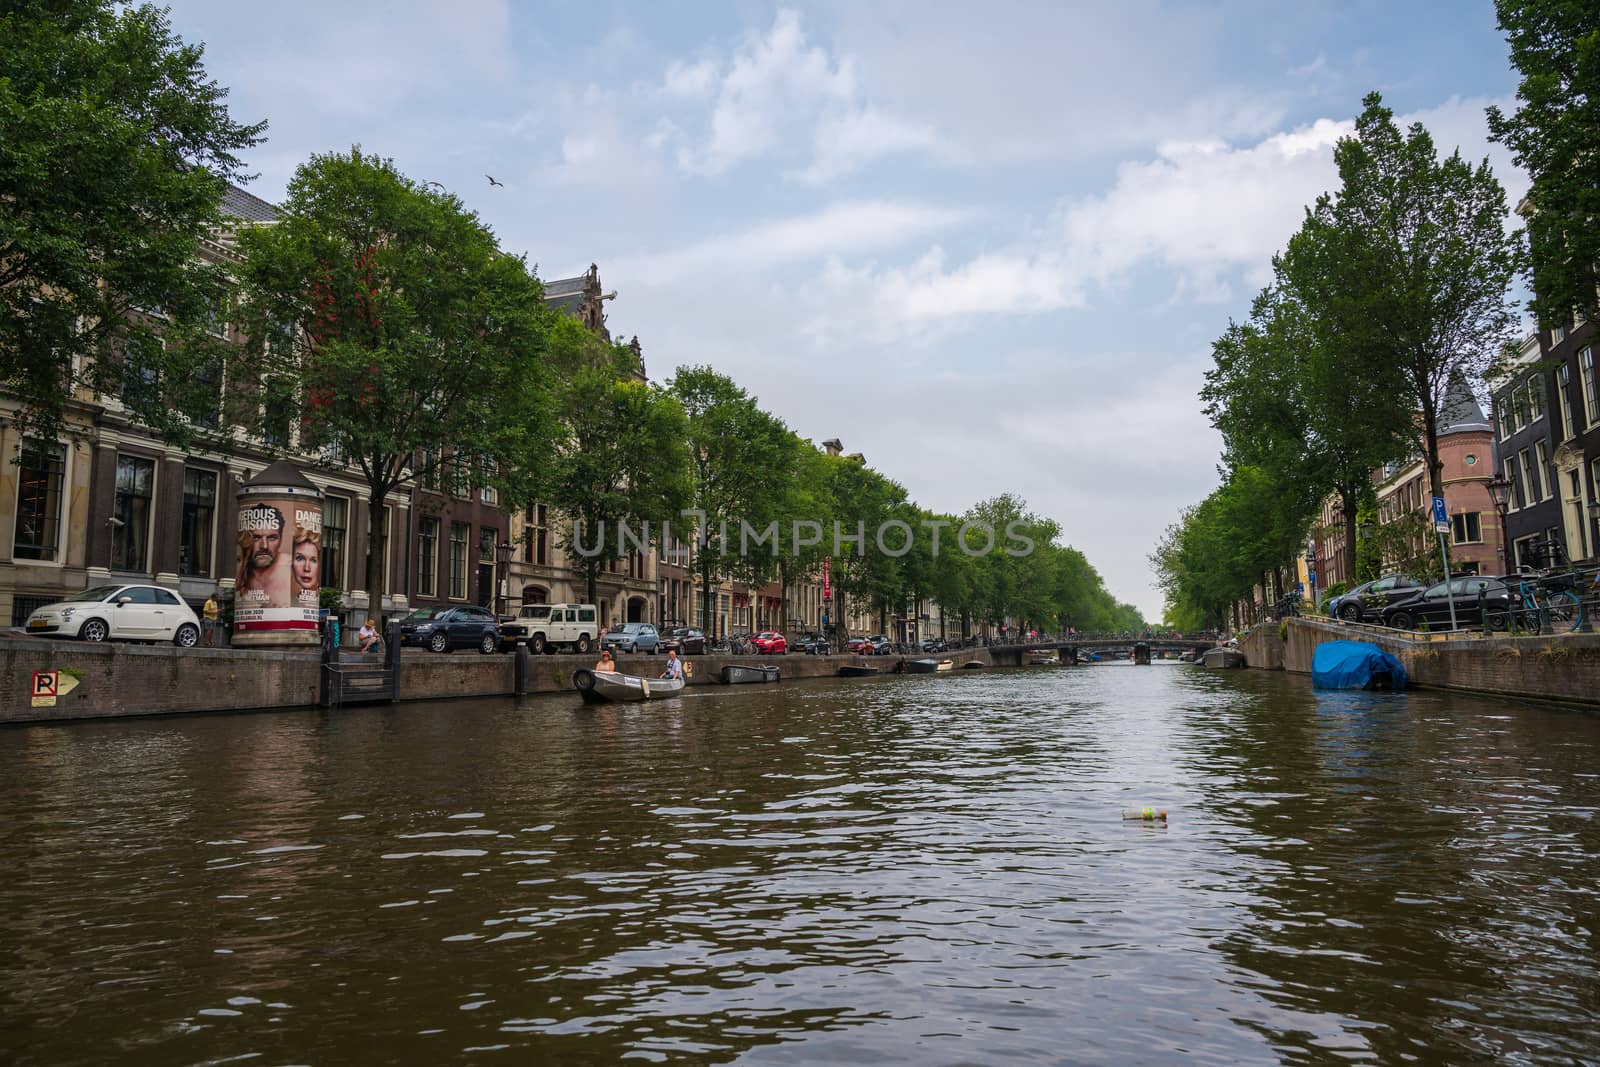 Canals of Amsterdam by jfbenning